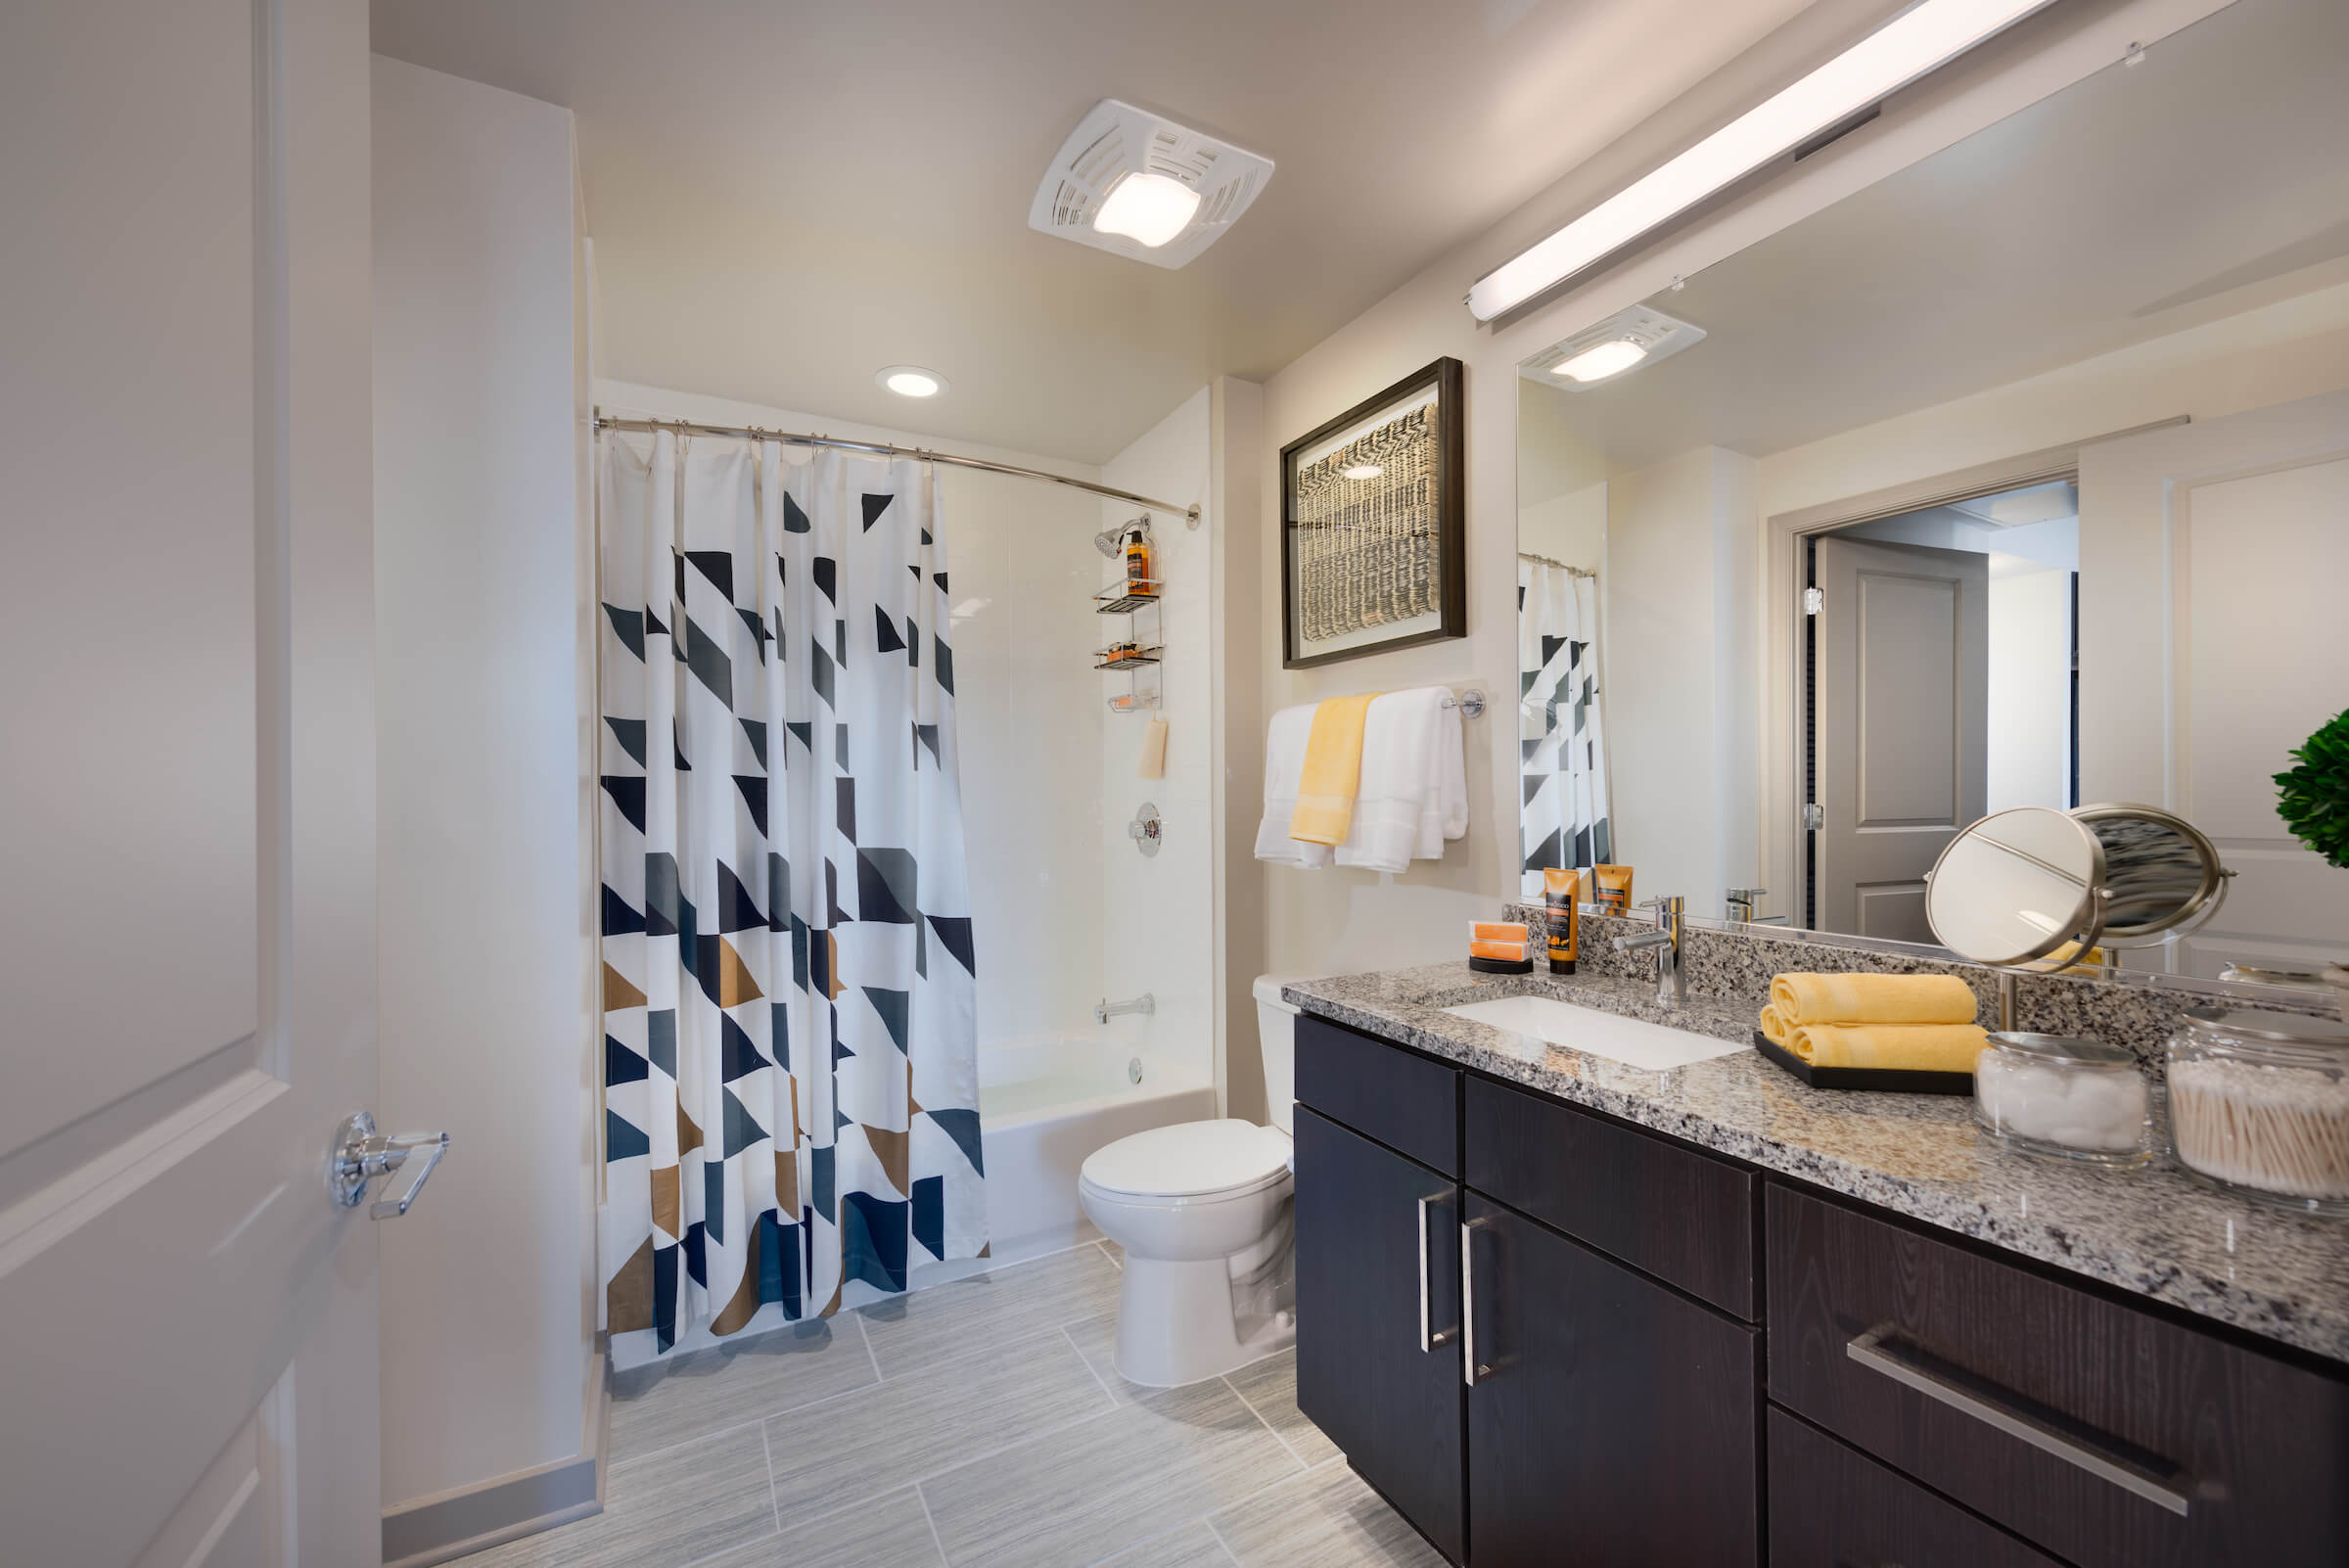 Extensive counter space in every bathroom.